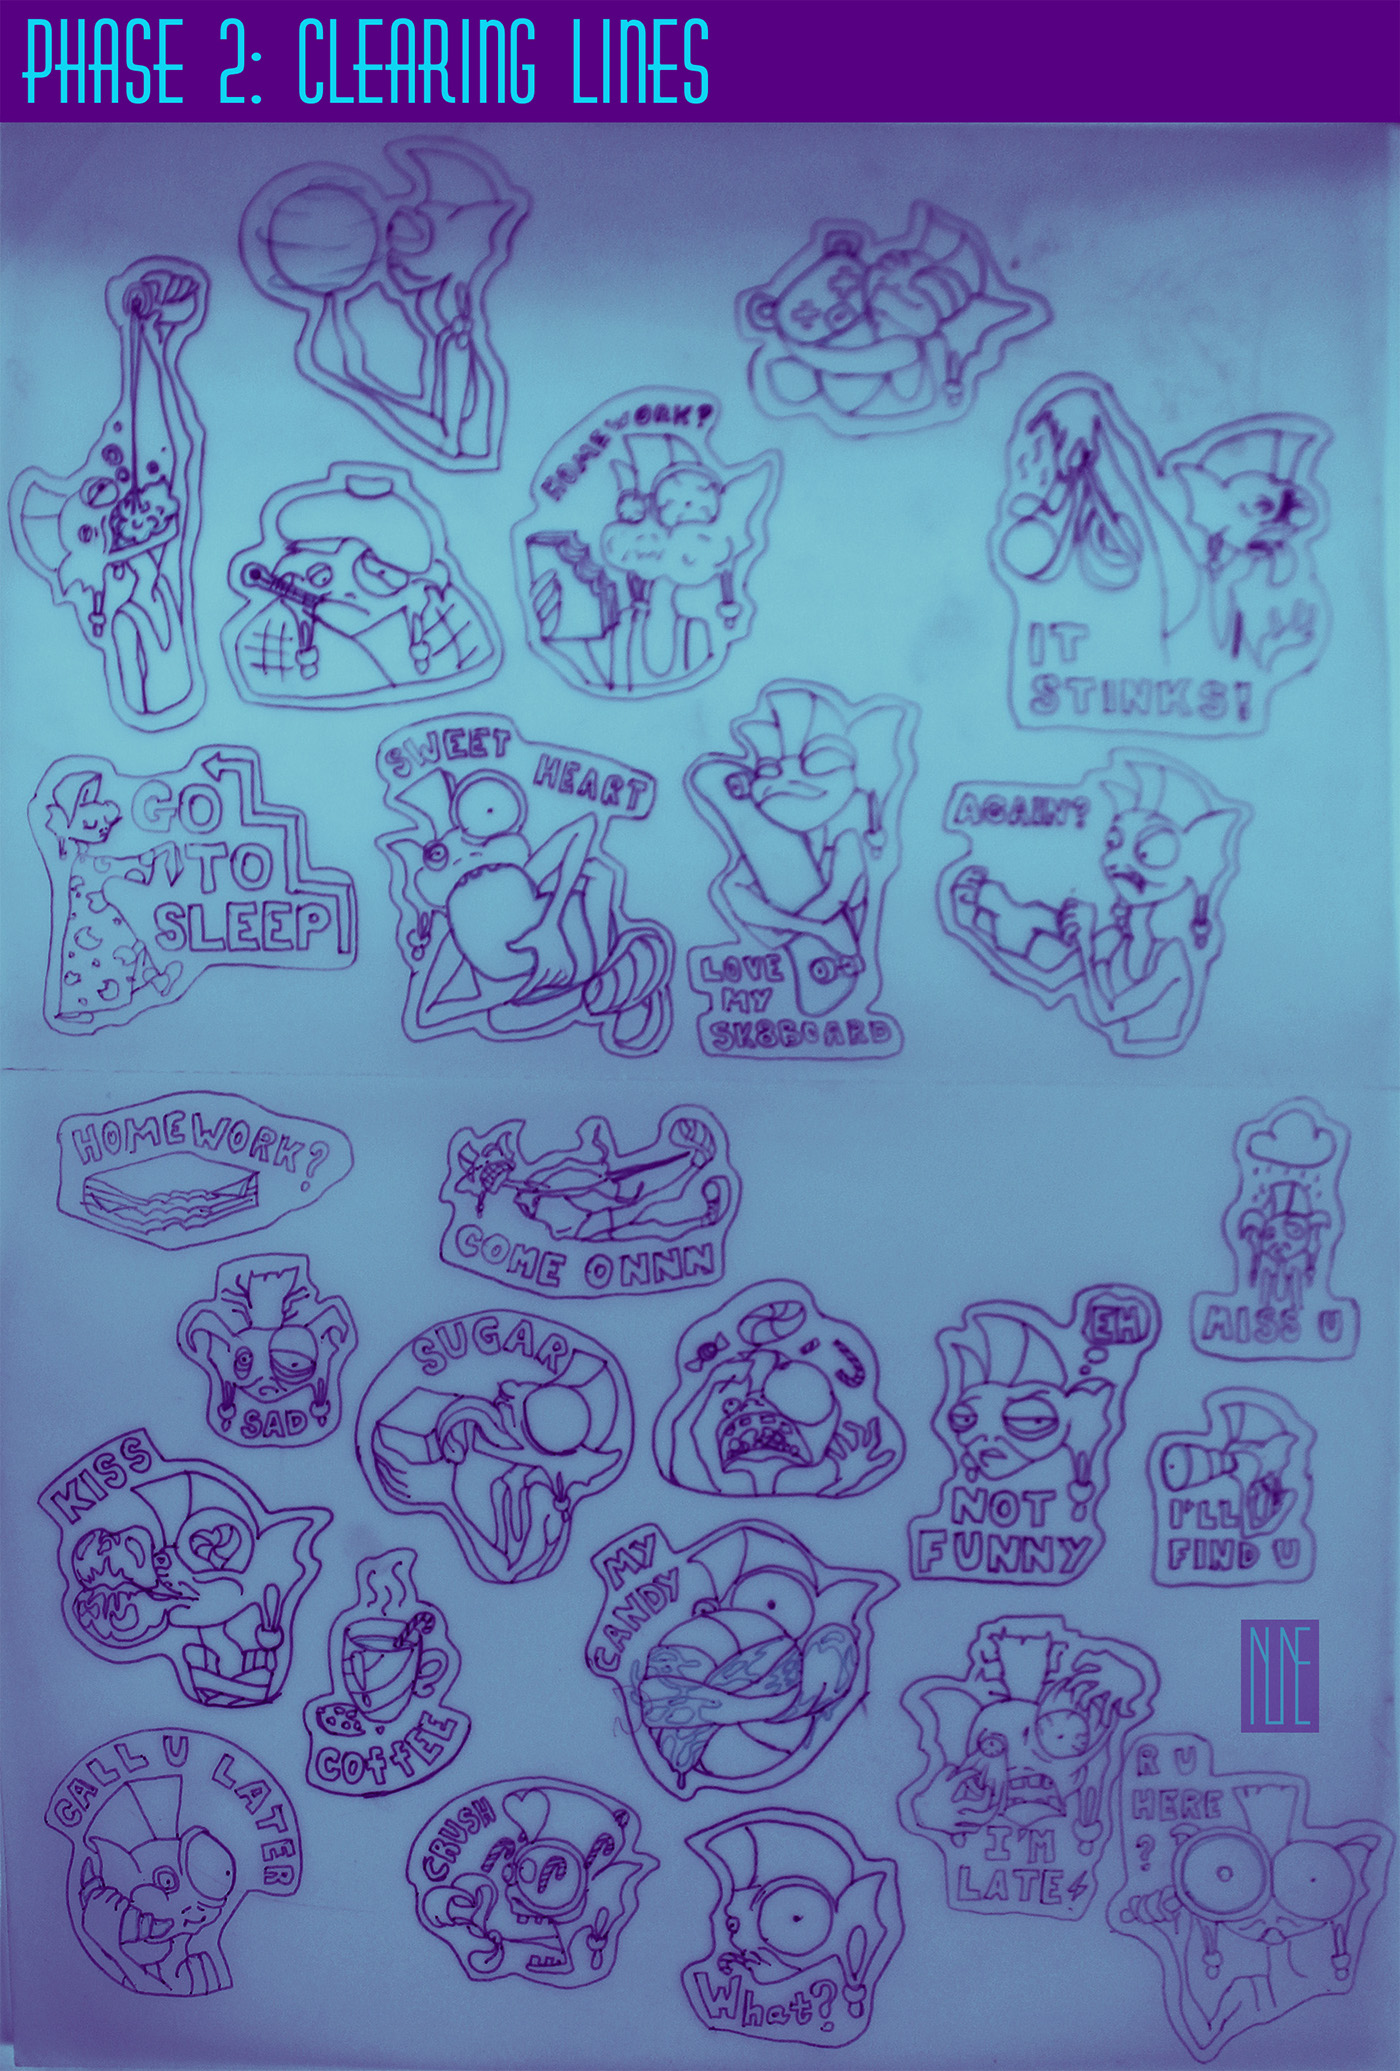 viber cool Character sticker stickers sketching clear lines purple cyan nune vibe